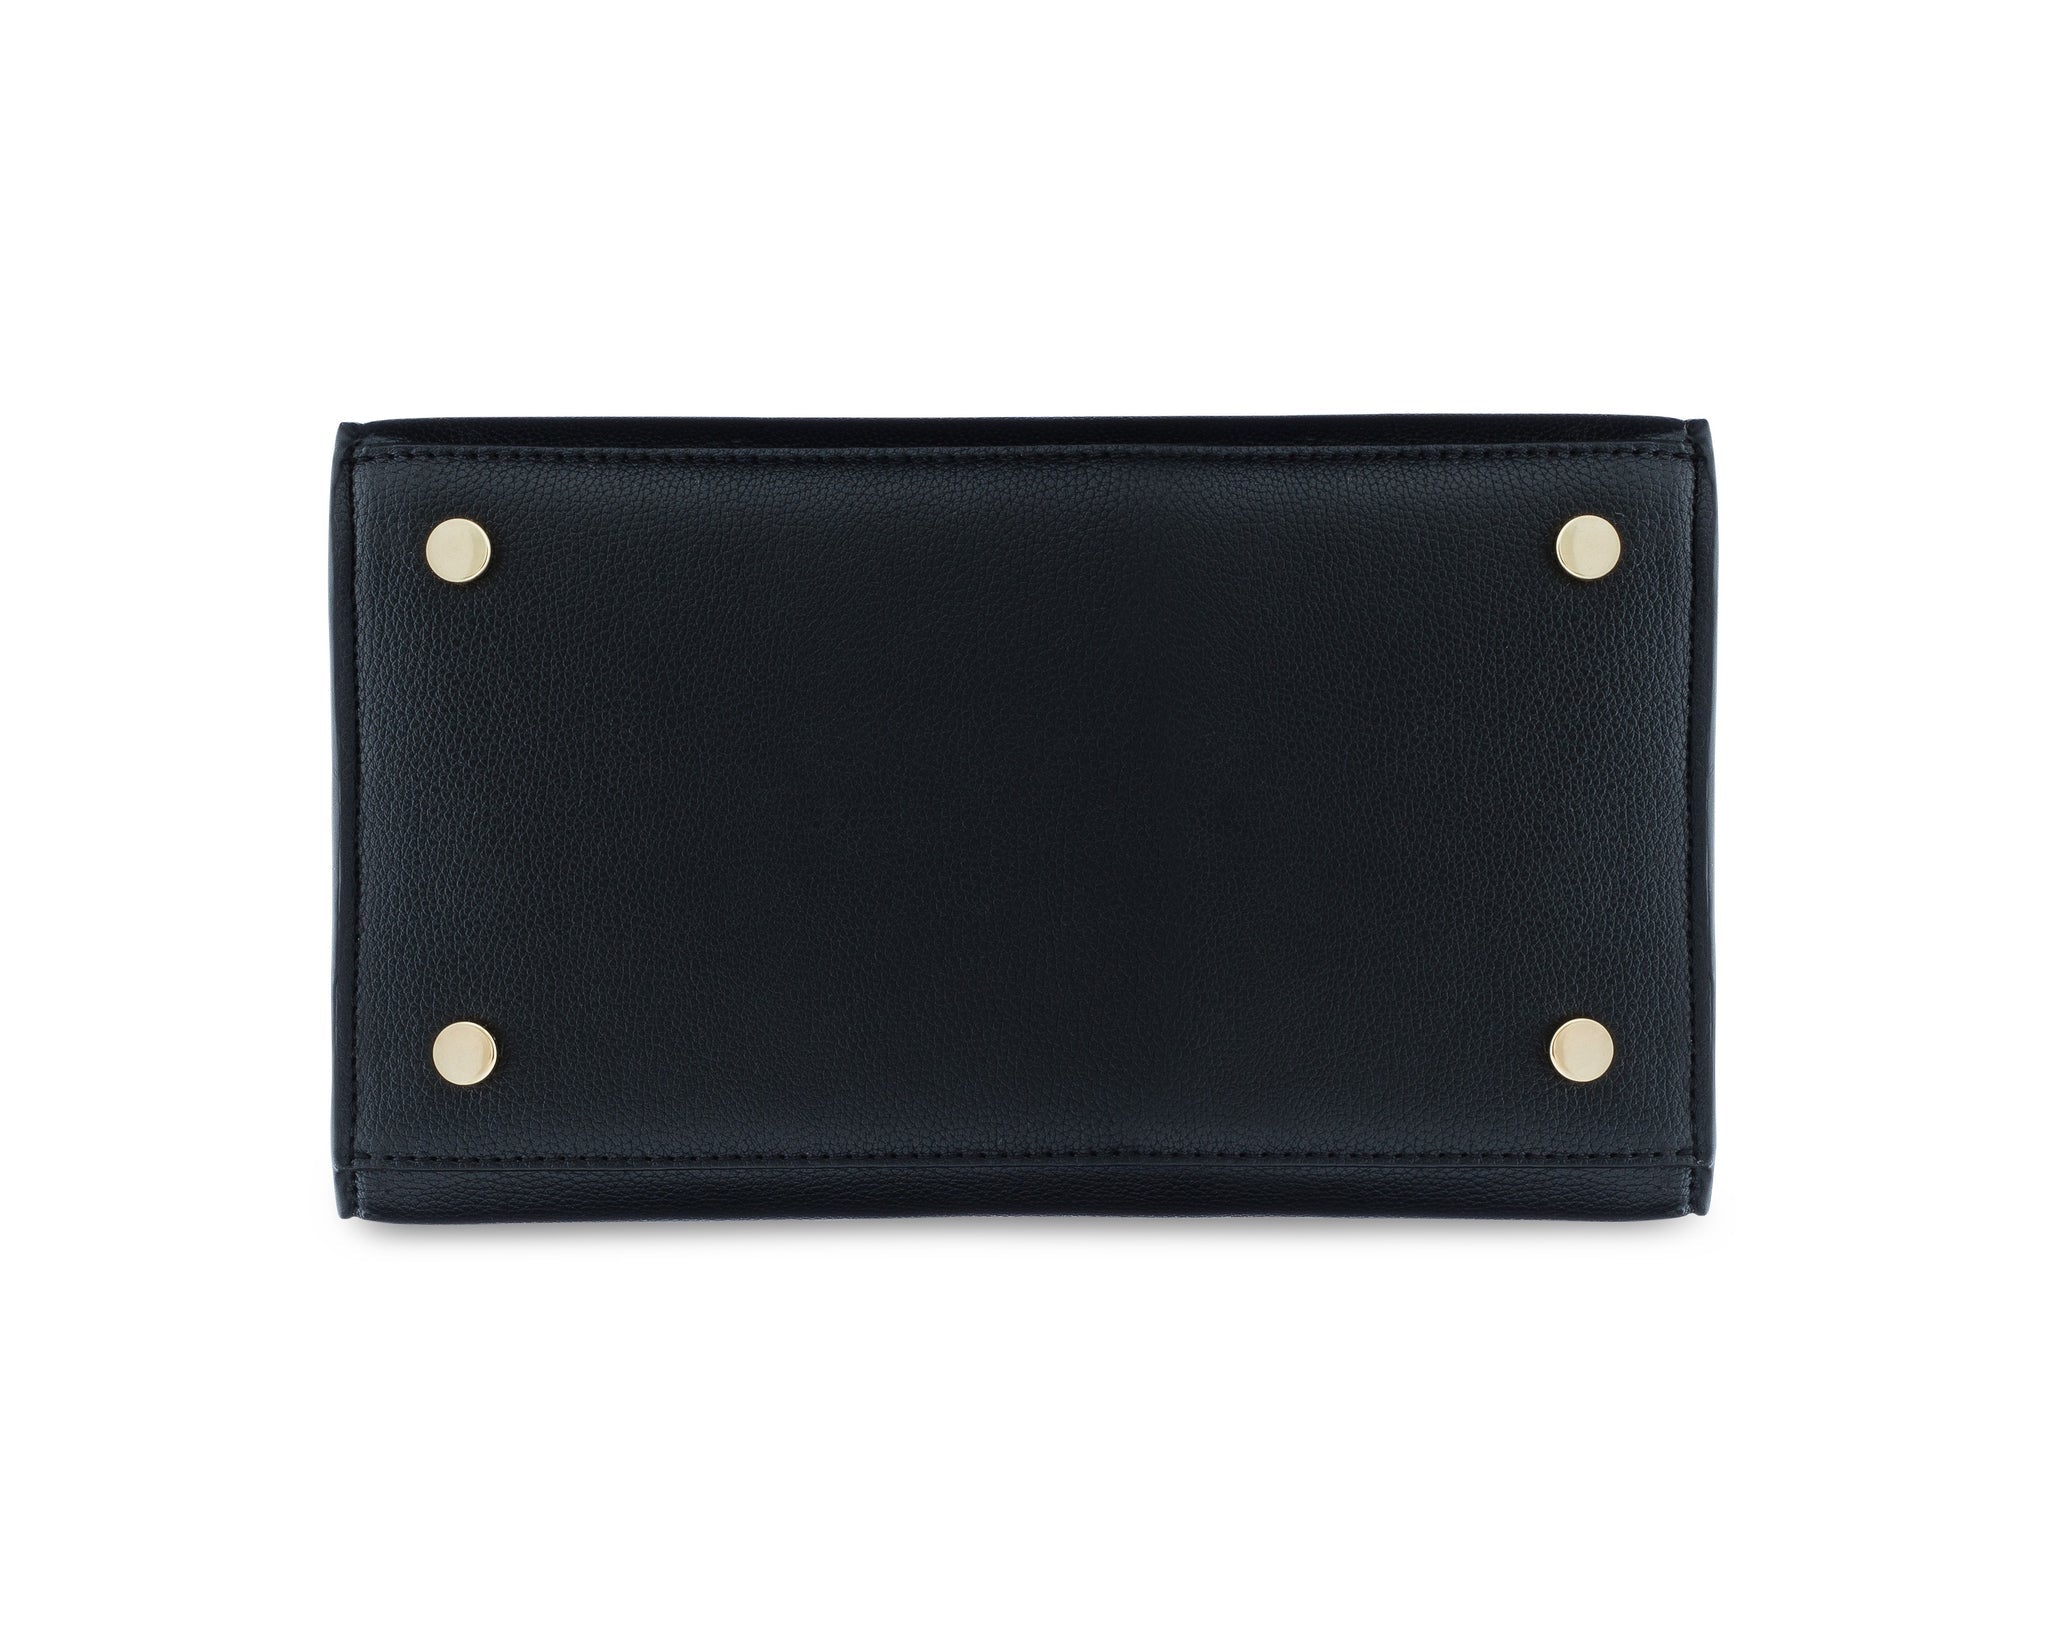 The Luncher (Black)